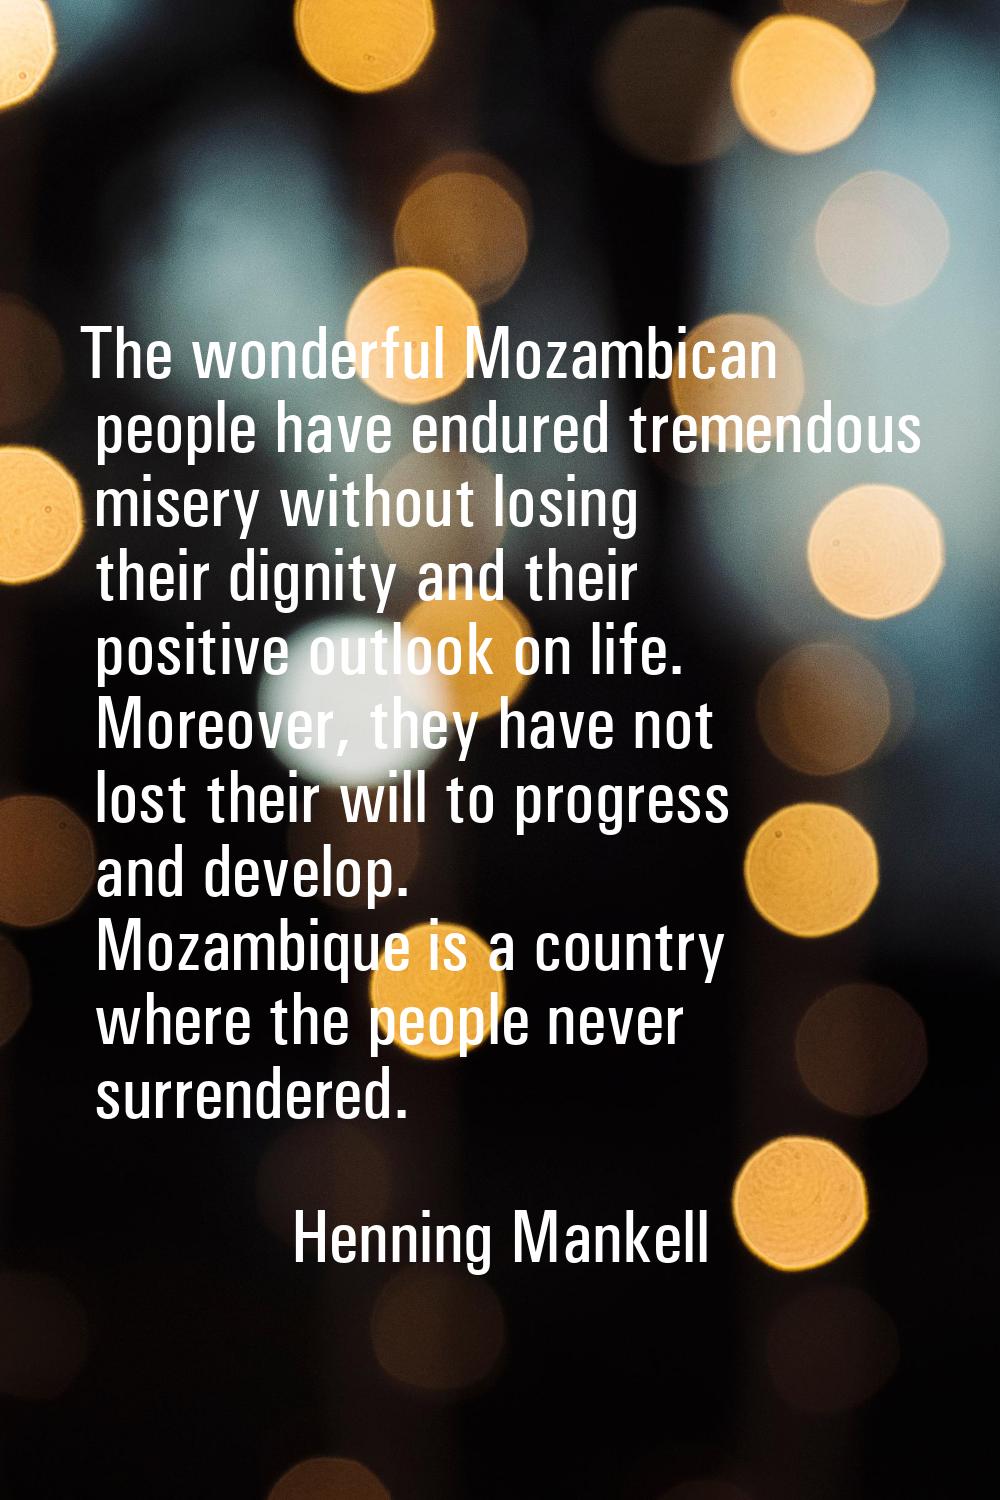 The wonderful Mozambican people have endured tremendous misery without losing their dignity and the